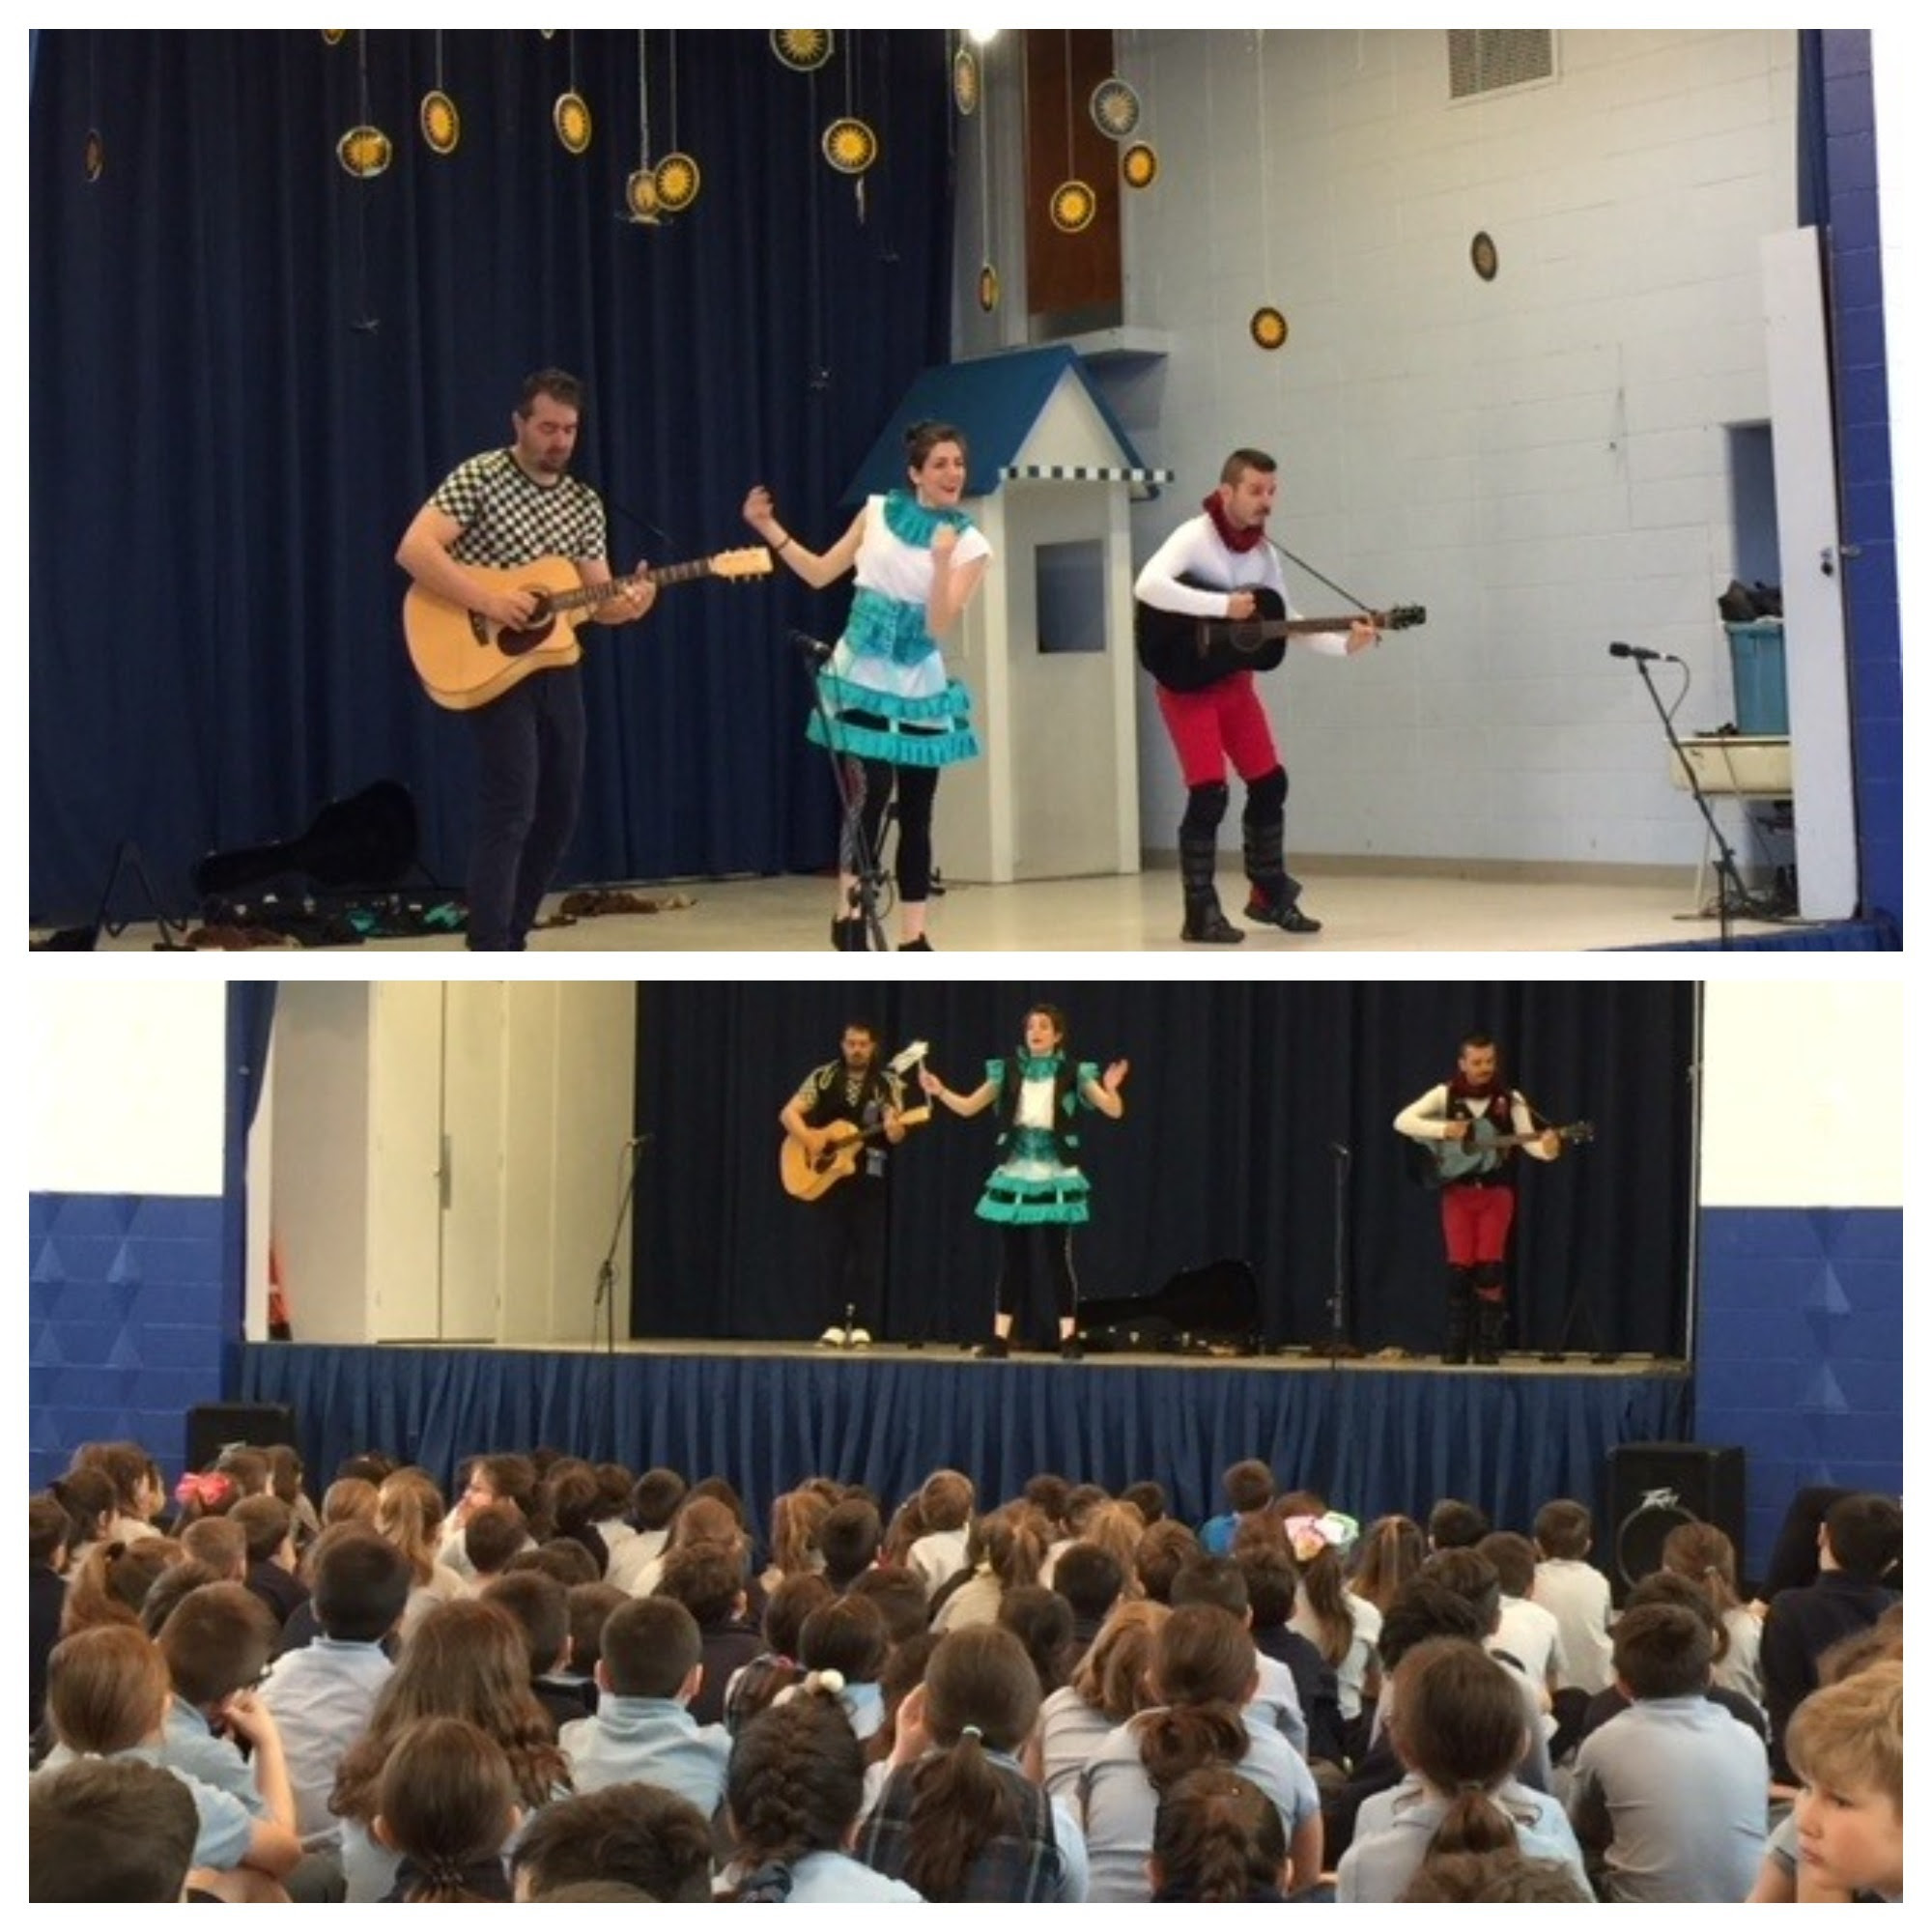 Hippo, a theater troupe from Greece, entertains our students.